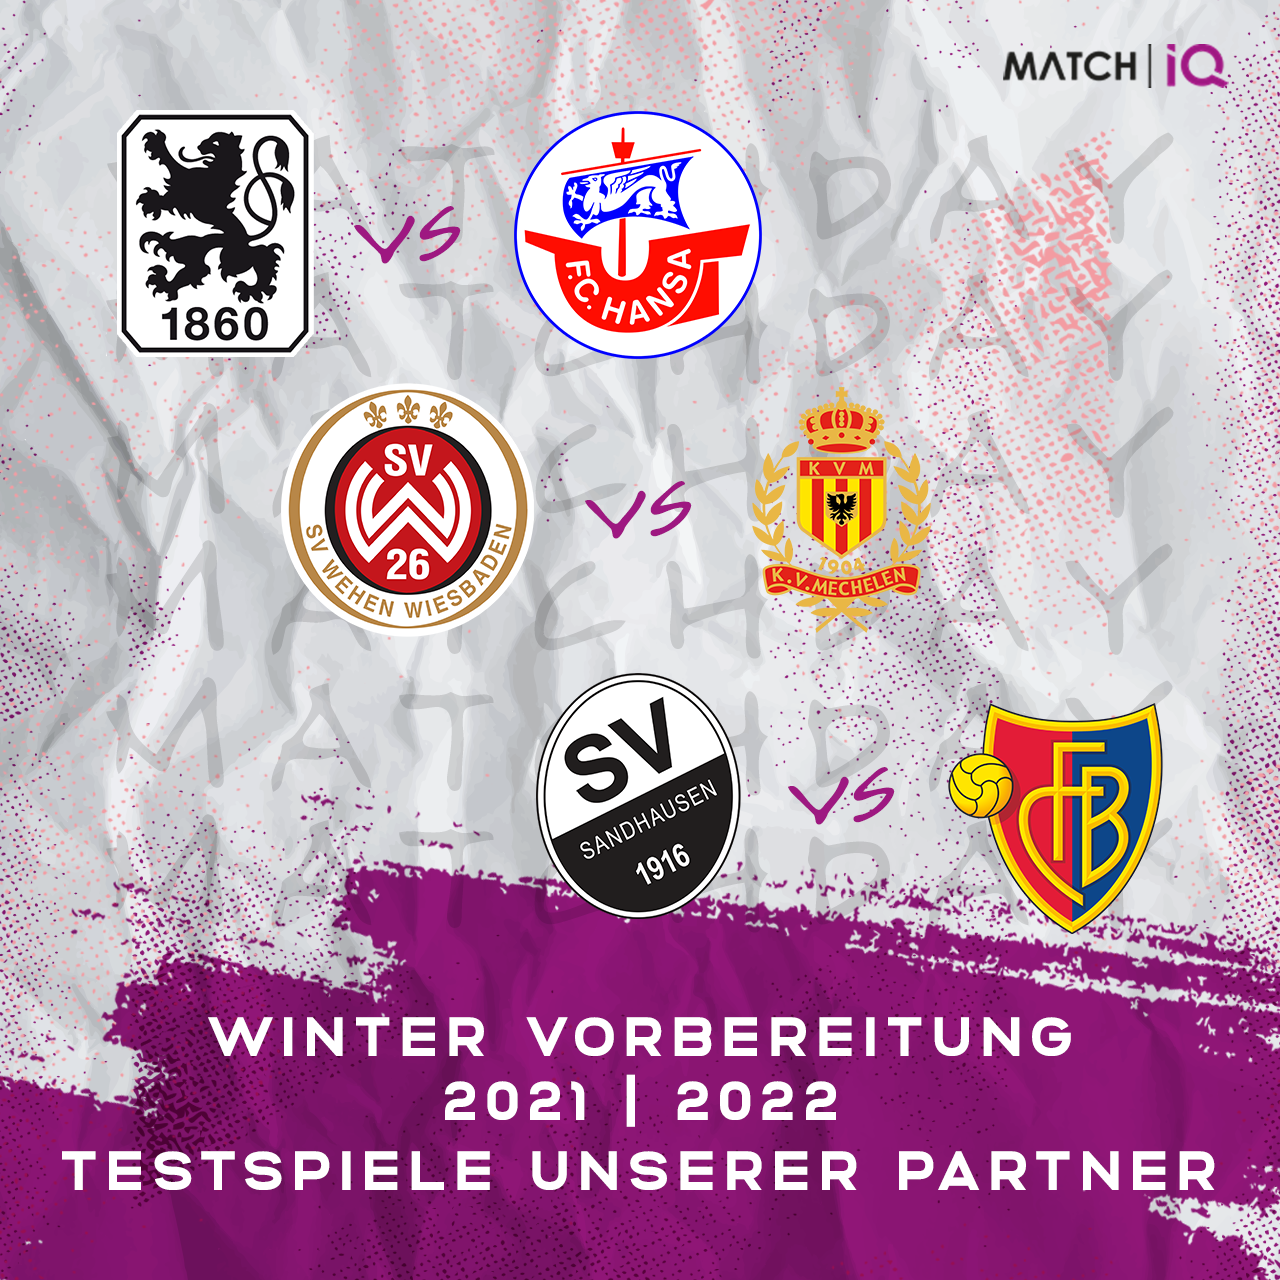 Friendly matches during the winter break